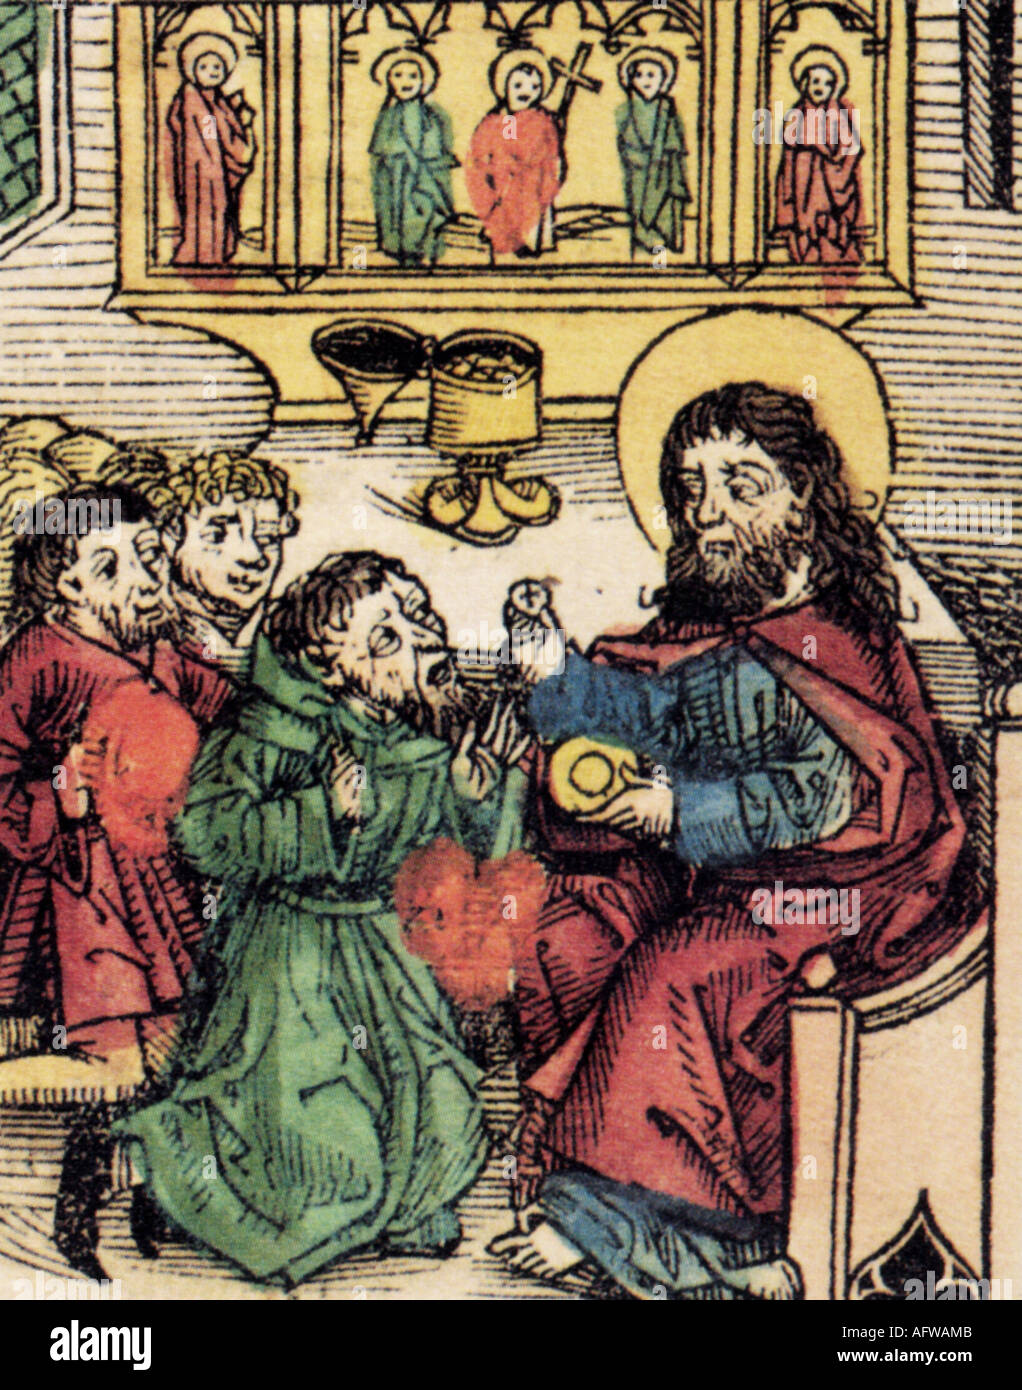 Prester John, maythical christian ruler, receives the eucharist by Jesus Christ, woodcut by Michael Wohlgemut or Wilhelm Pleydenwurff, world chronicle of Hartmann Schedel, Nuremberg 1493, presbyter John, legendary king of India or Ethiopia, religion, christianity, legend, communion, , Artist's Copyright has not to be cleared Stock Photo